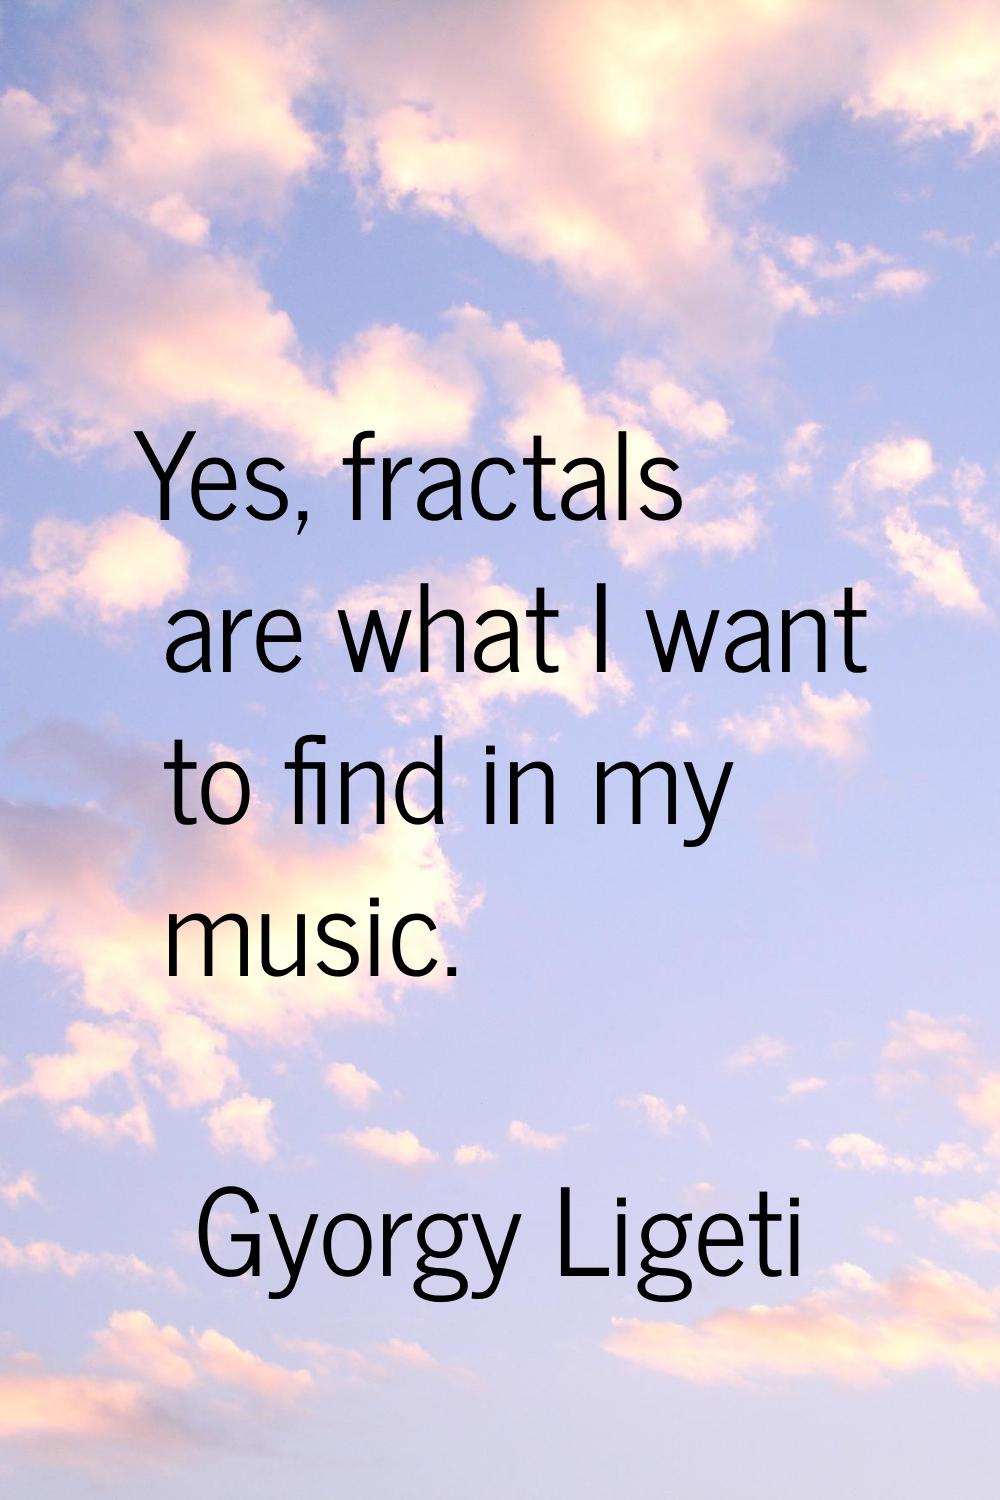 Yes, fractals are what I want to find in my music.